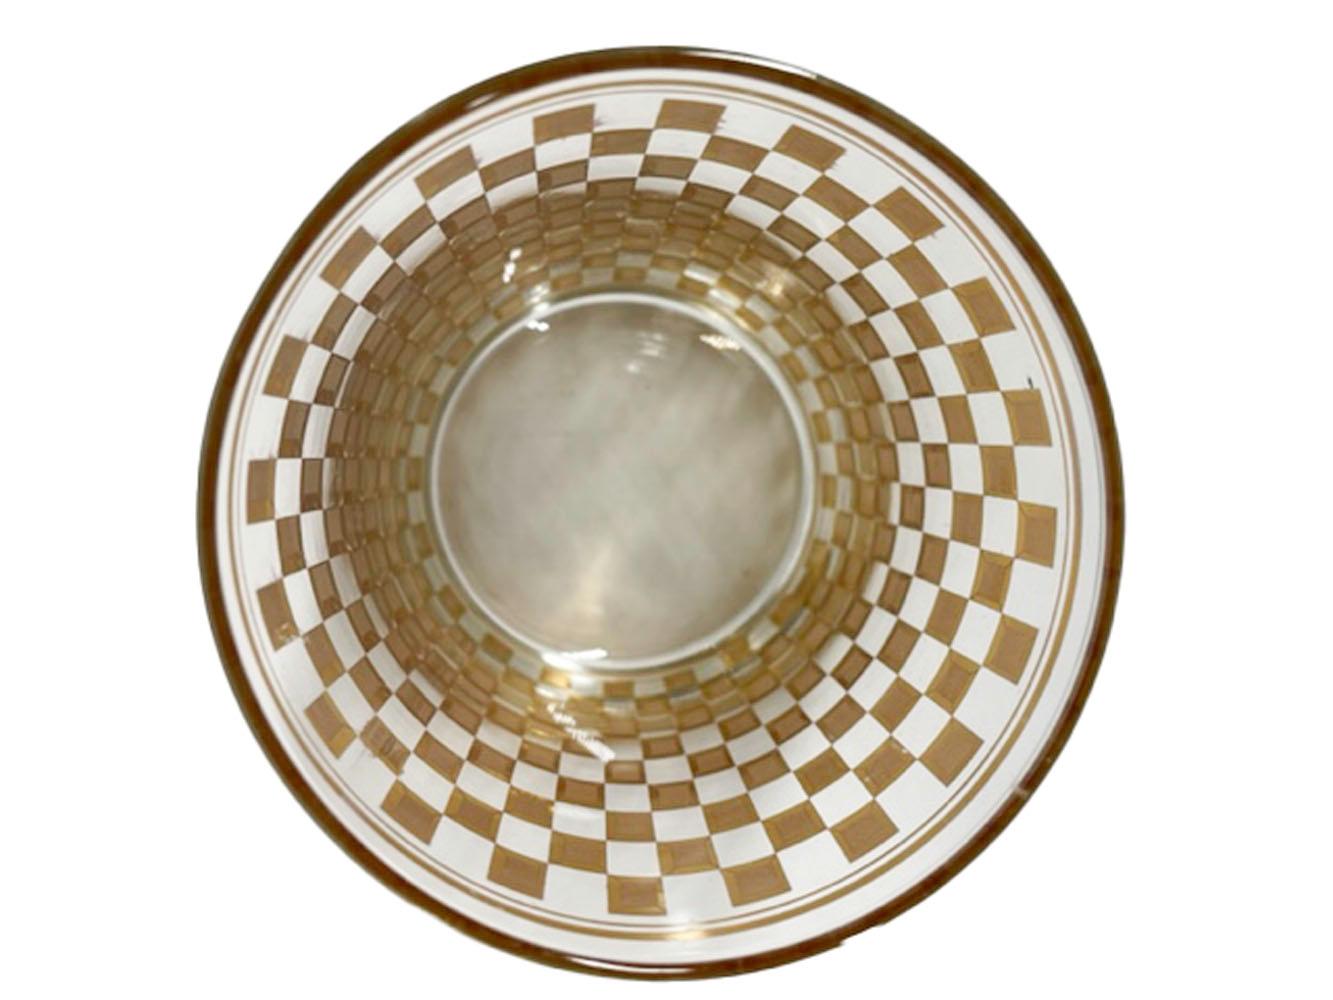 Four Culver Double Rocks Glasses in Two-Tone Gold Check Design In Good Condition For Sale In Nantucket, MA